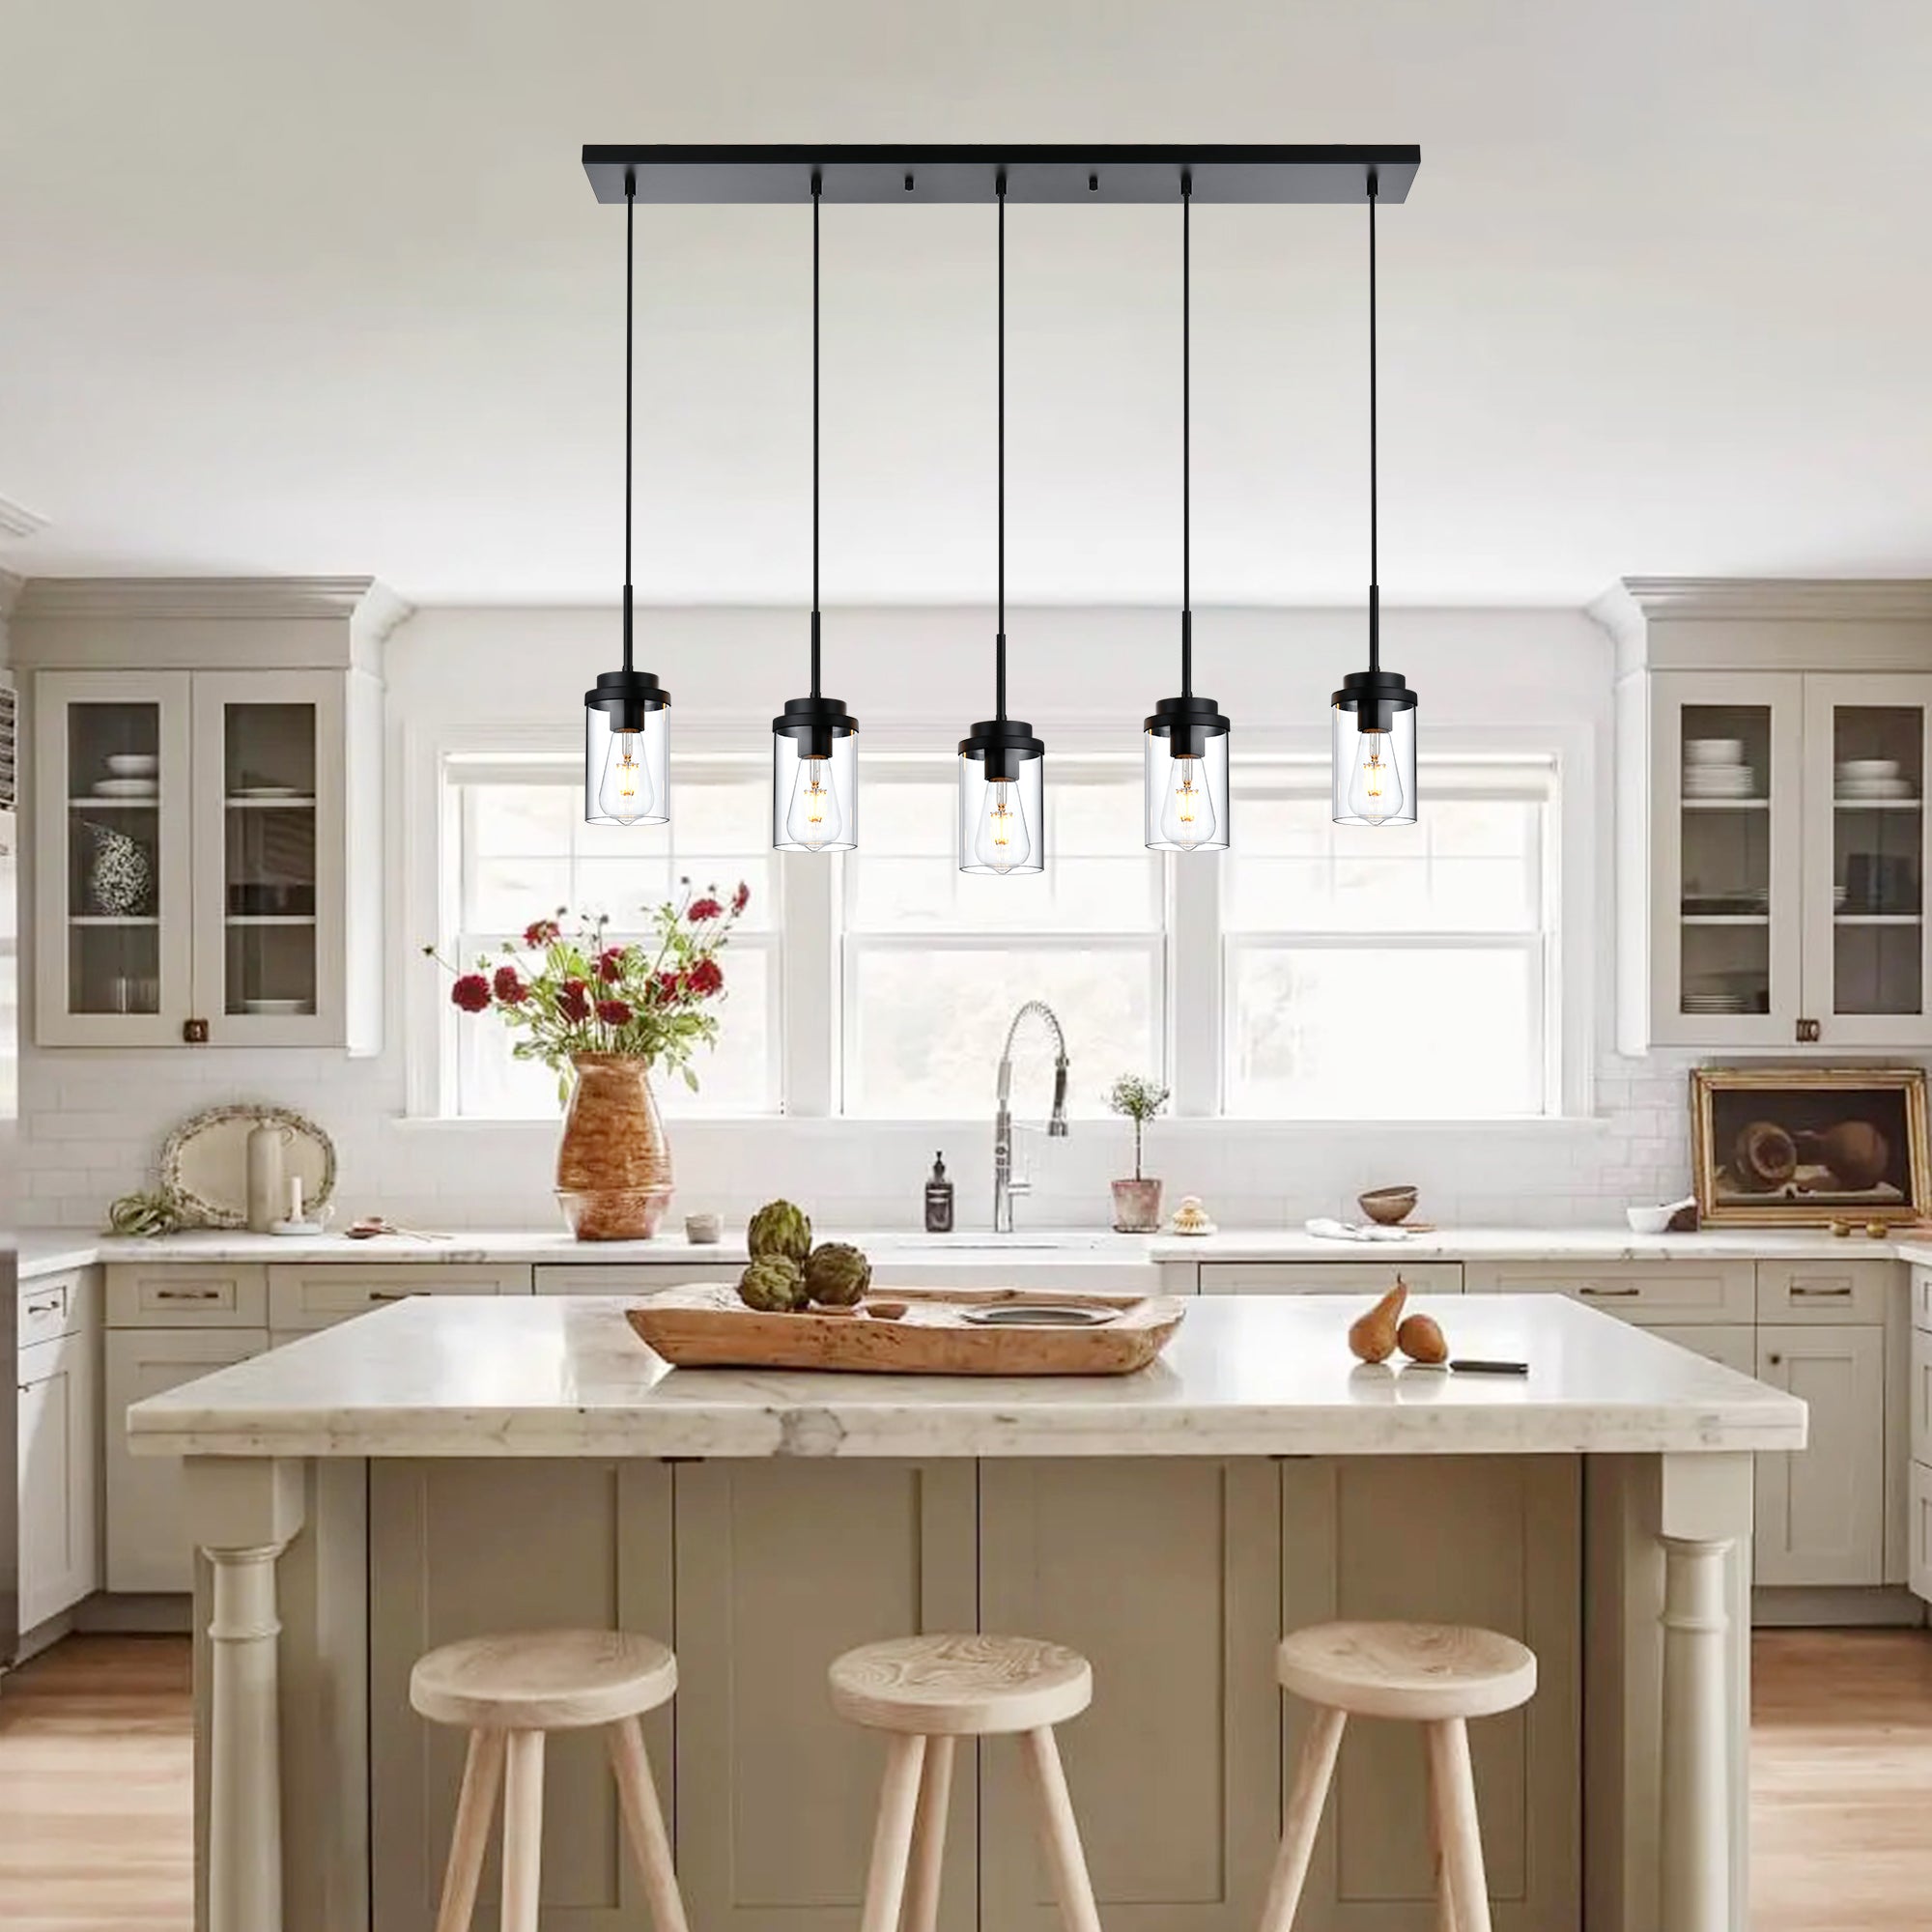 Kitchen Island Lighting Modern 5 Lights Linear Chandeliers for Dining Room, Industrial Black Pendant Light Fixtures Ceiling Hanging with Clear Glass Shade, 40.1 Inches Length